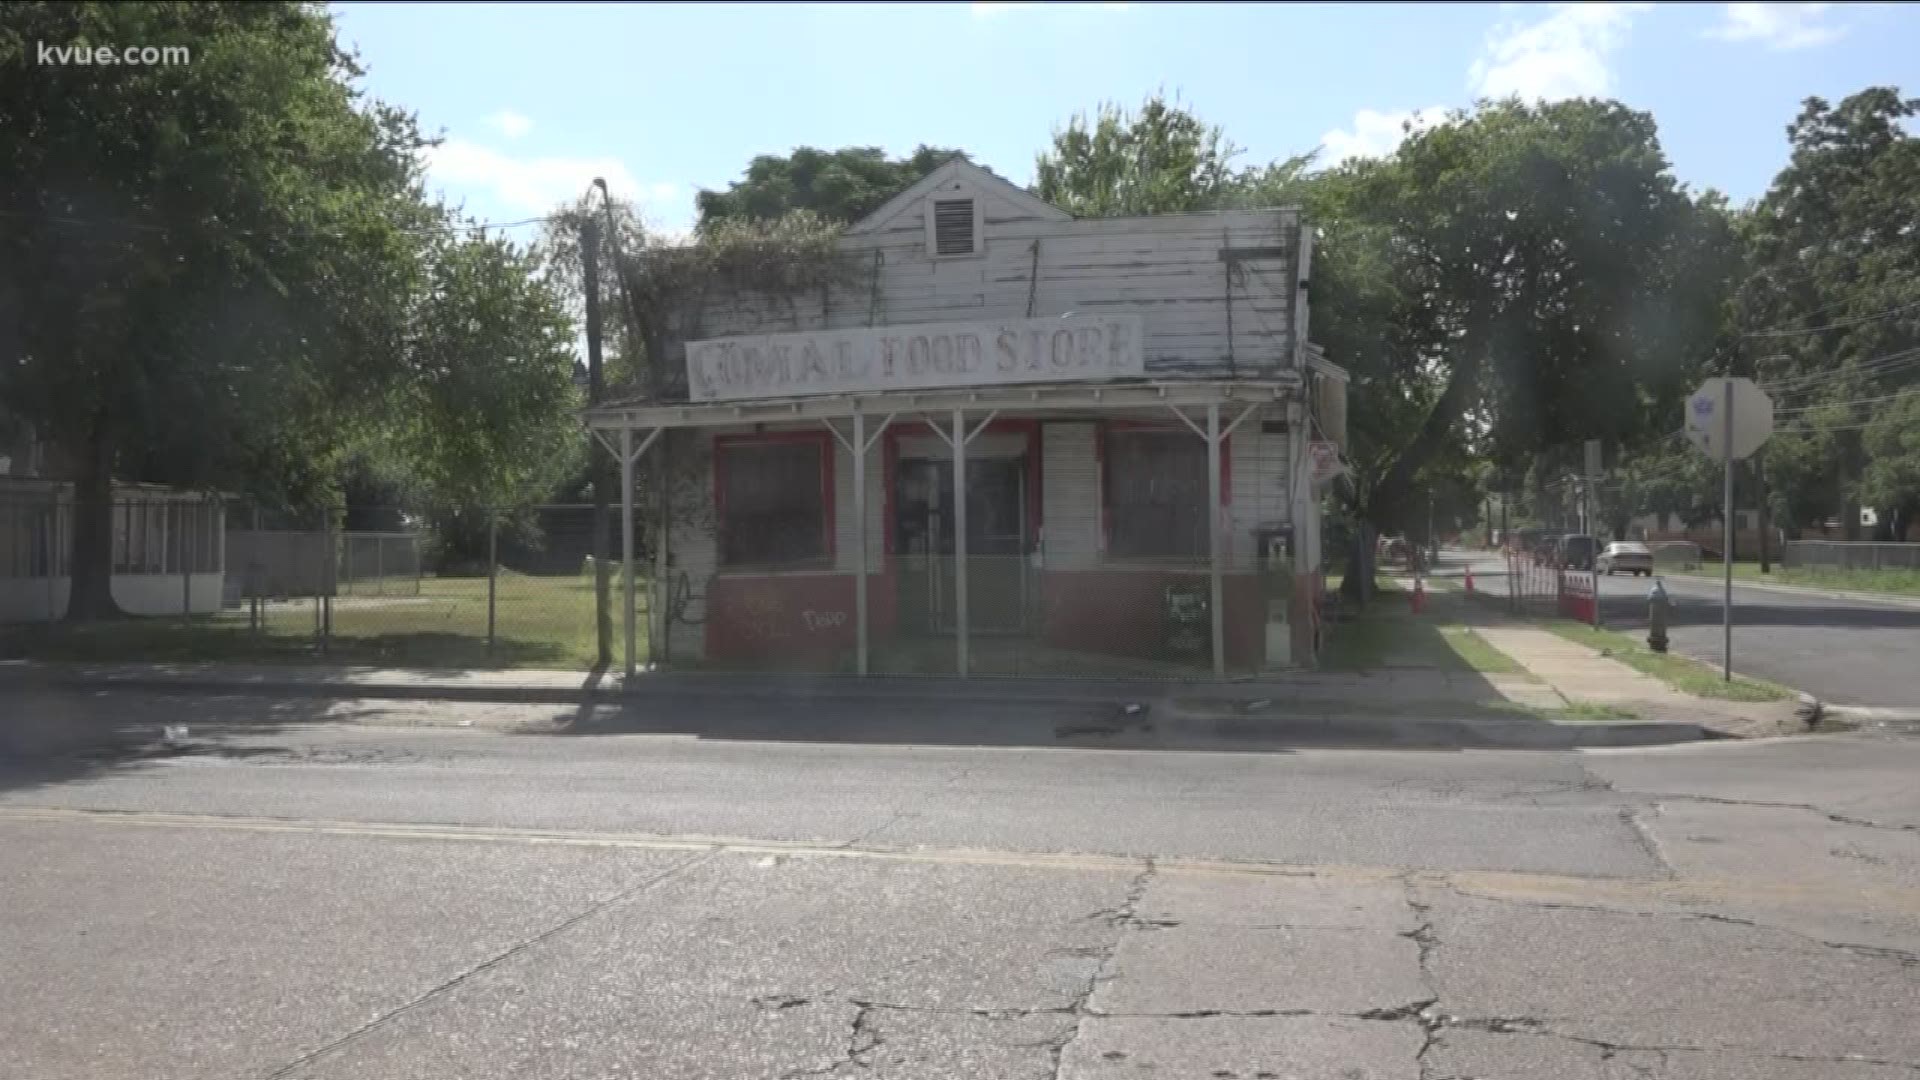 The store has been on Comal Street since the 1920s, although it has sat empty for years.